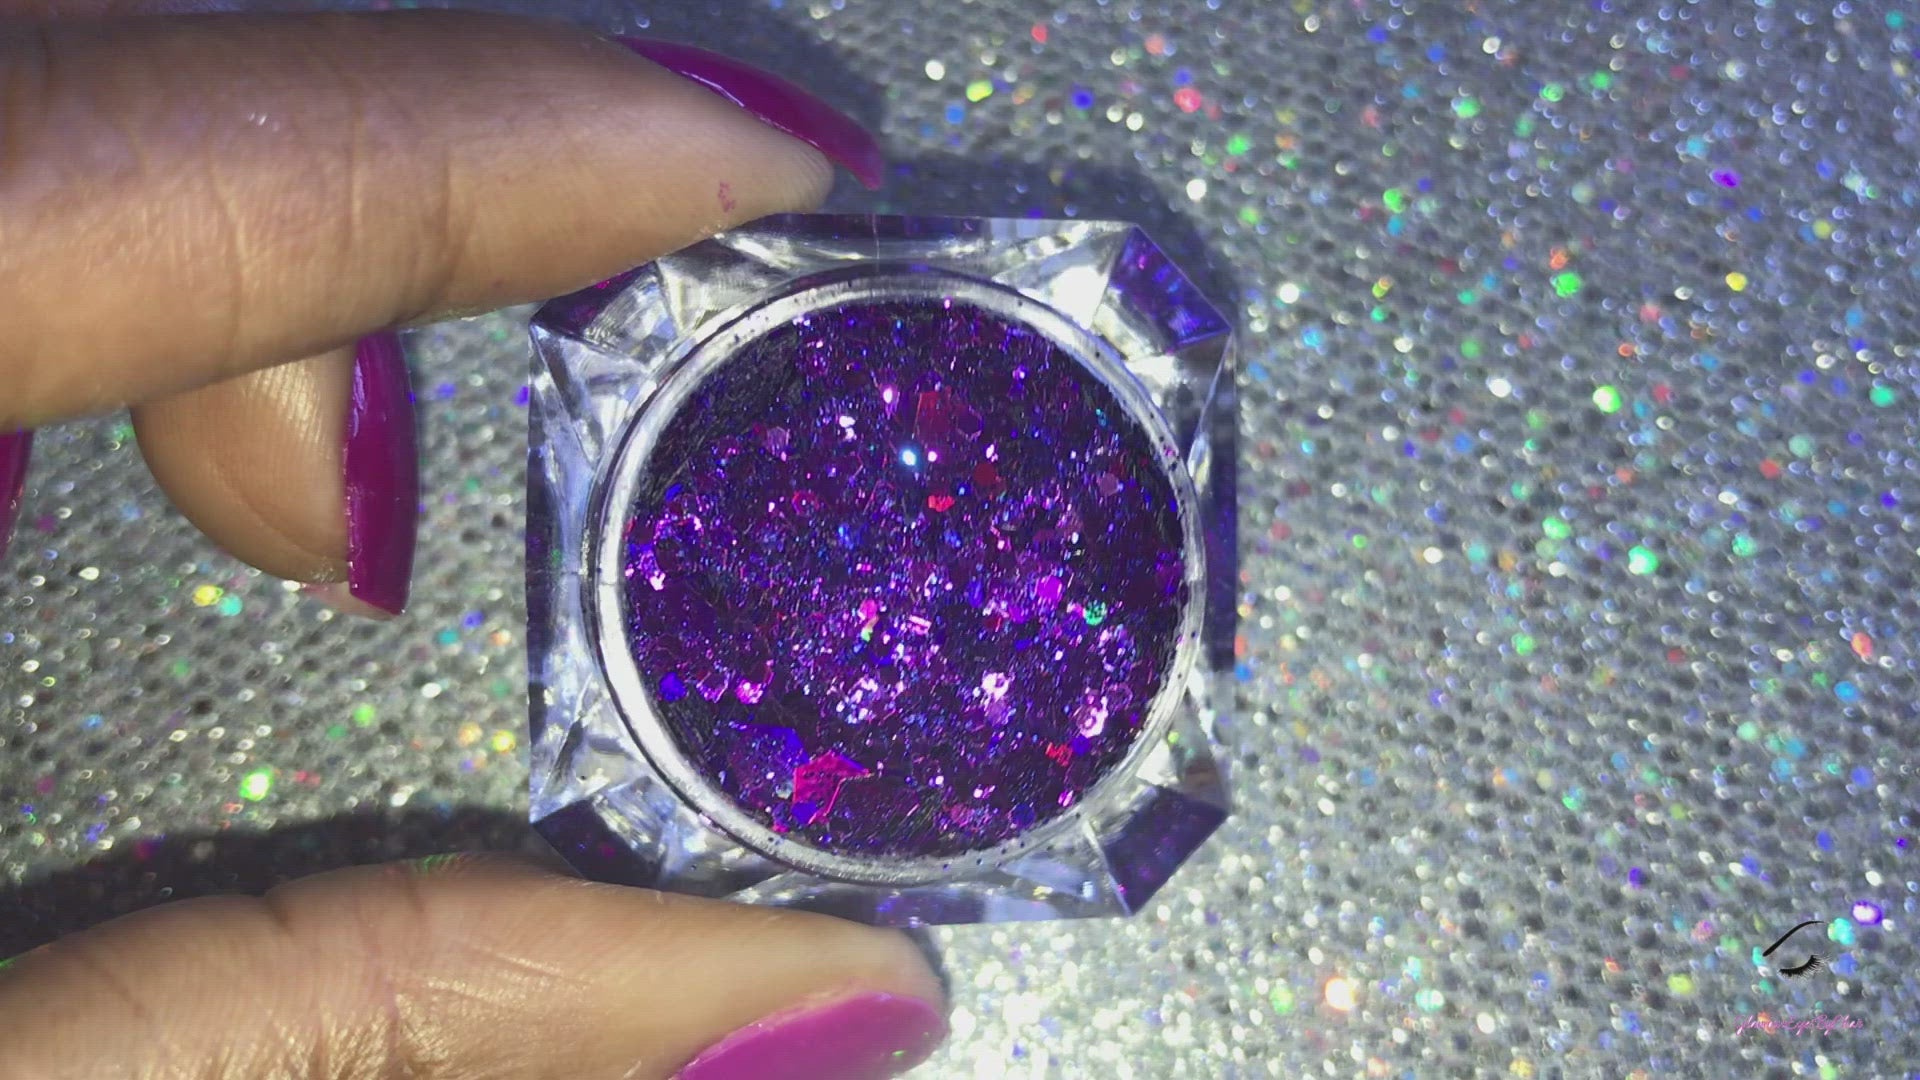 This glitter is called Love Spell and is part of the super chunky glitter collection. It consists of deep purple and violet glitter with a holographic sparkle. Love Spell can be used for your face, body, hair and nails. Comes in 5g jars only.